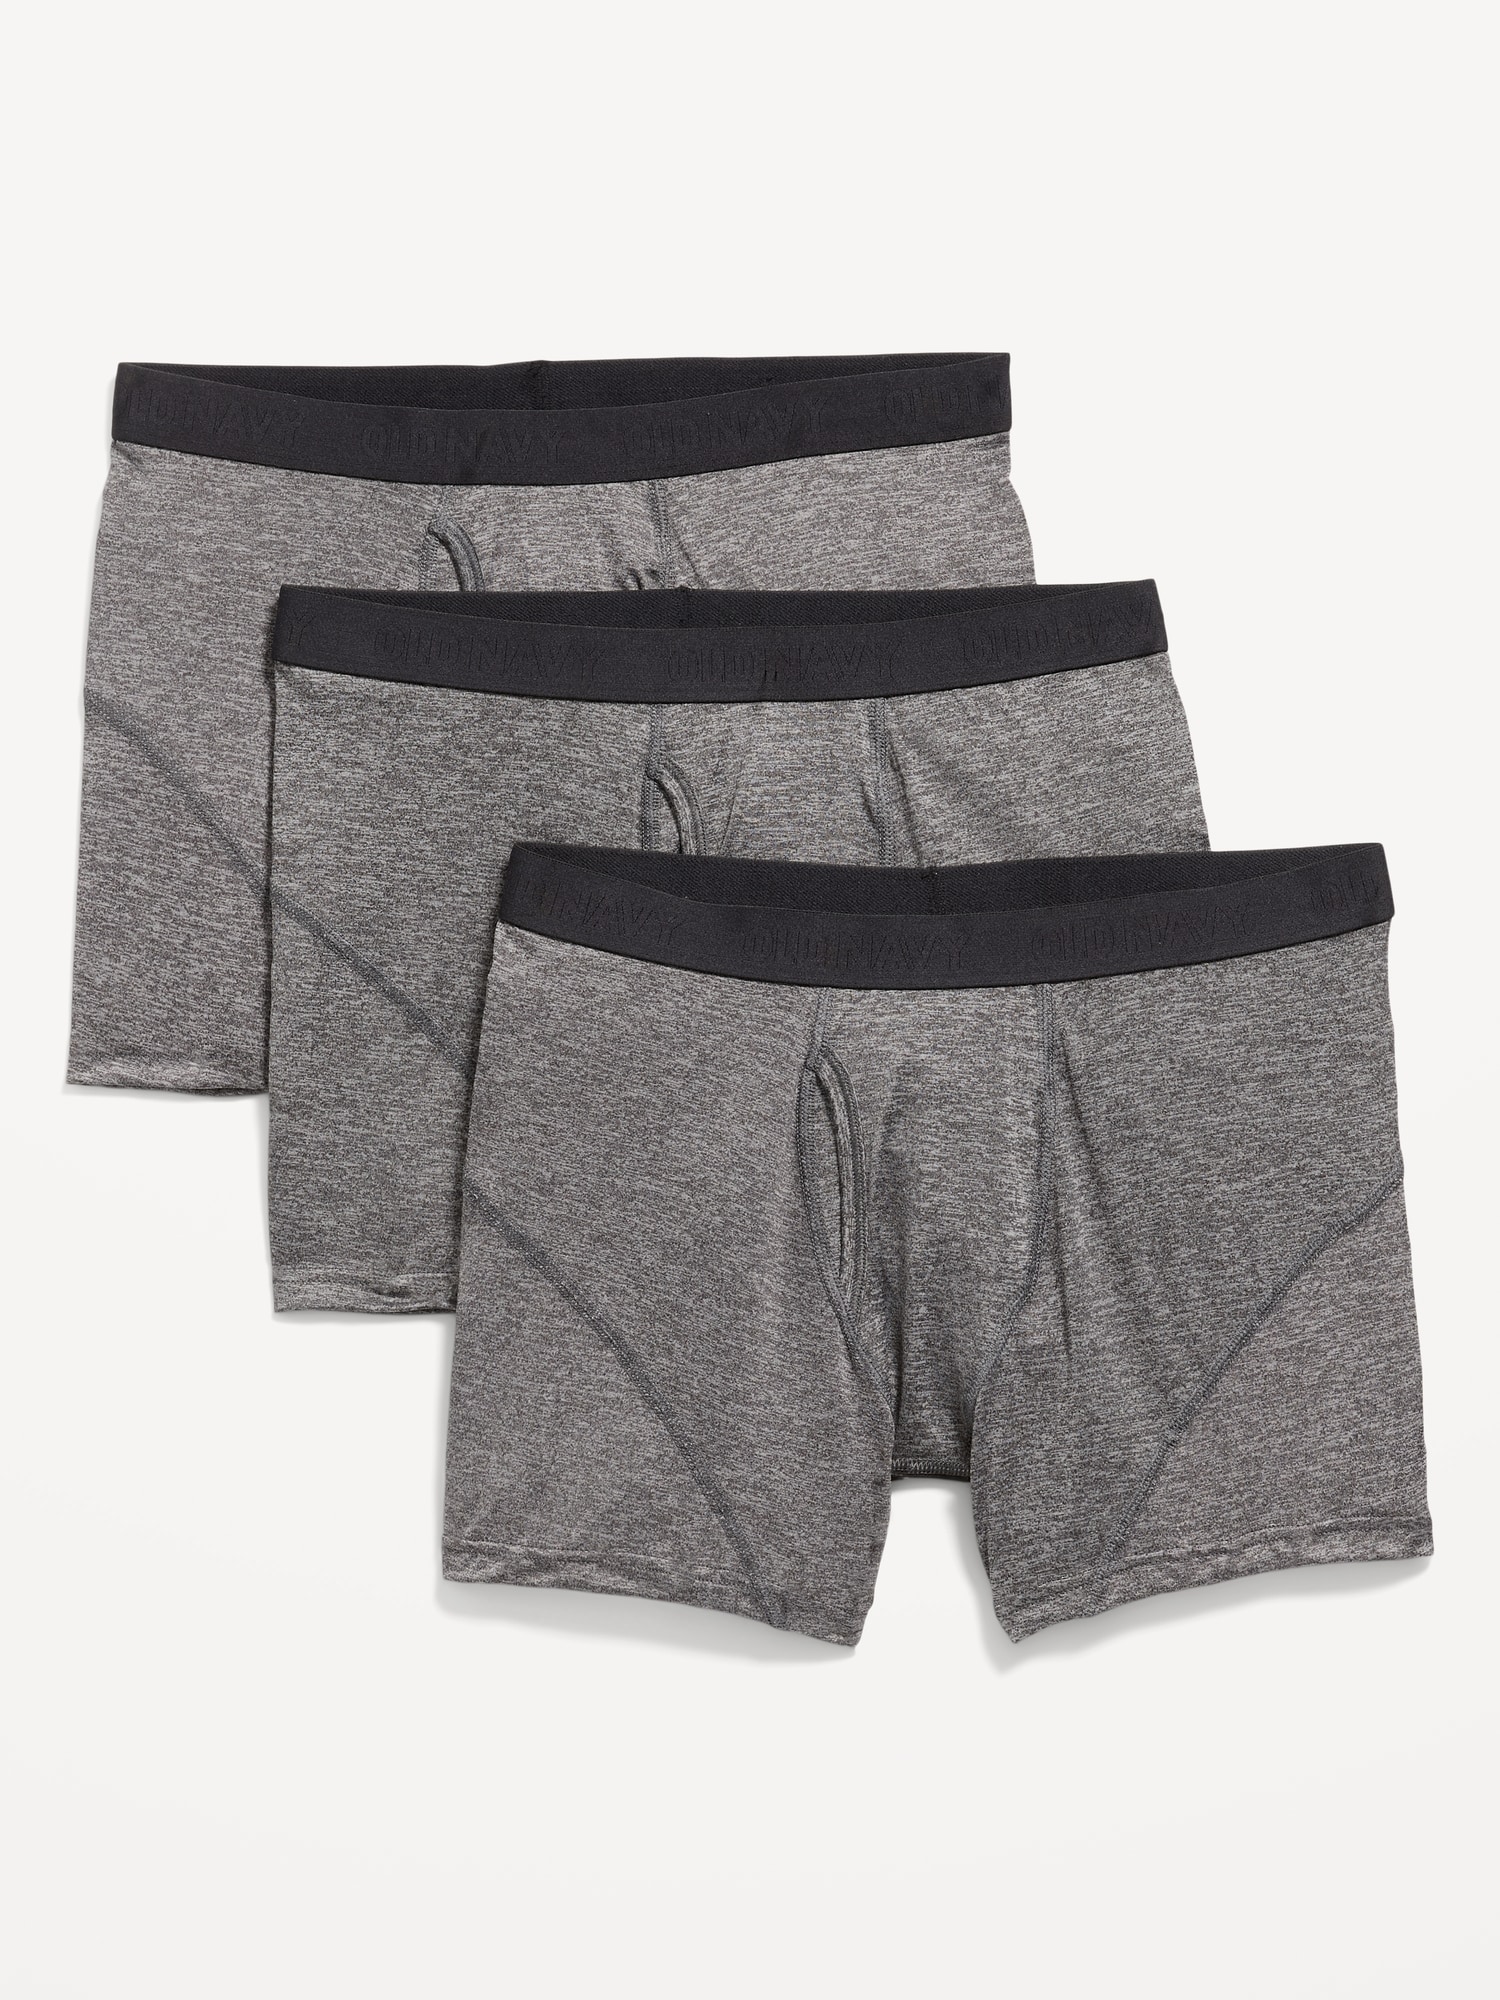 Old Navy Go-Dry Cool Performance Boxer-Briefs Underwear 3-Pack for Men -- 5-inch inseam gray. 1